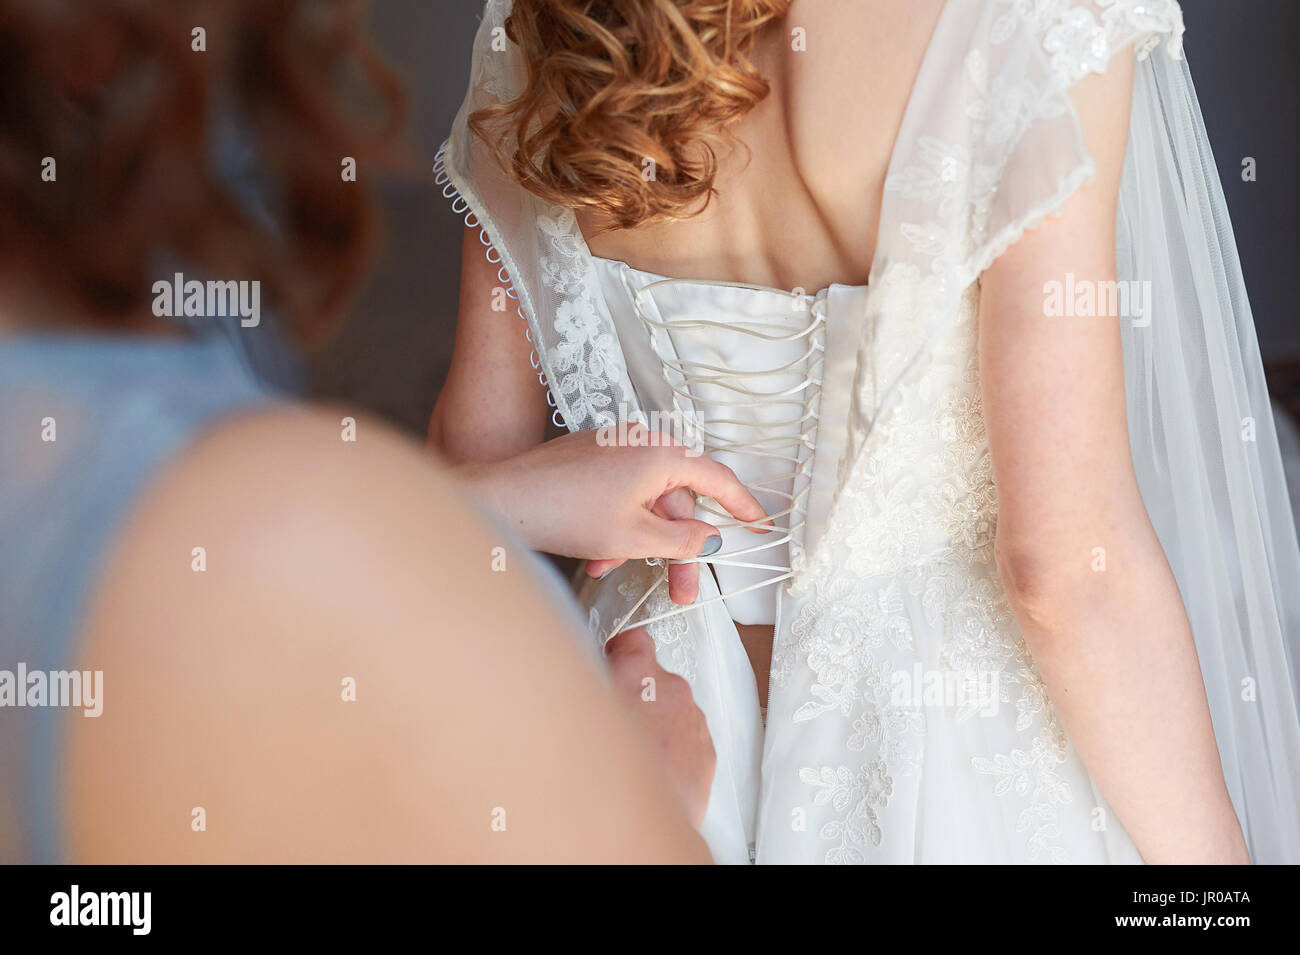 Bridesmaid helps to bride dress in wedding day Stock Photo